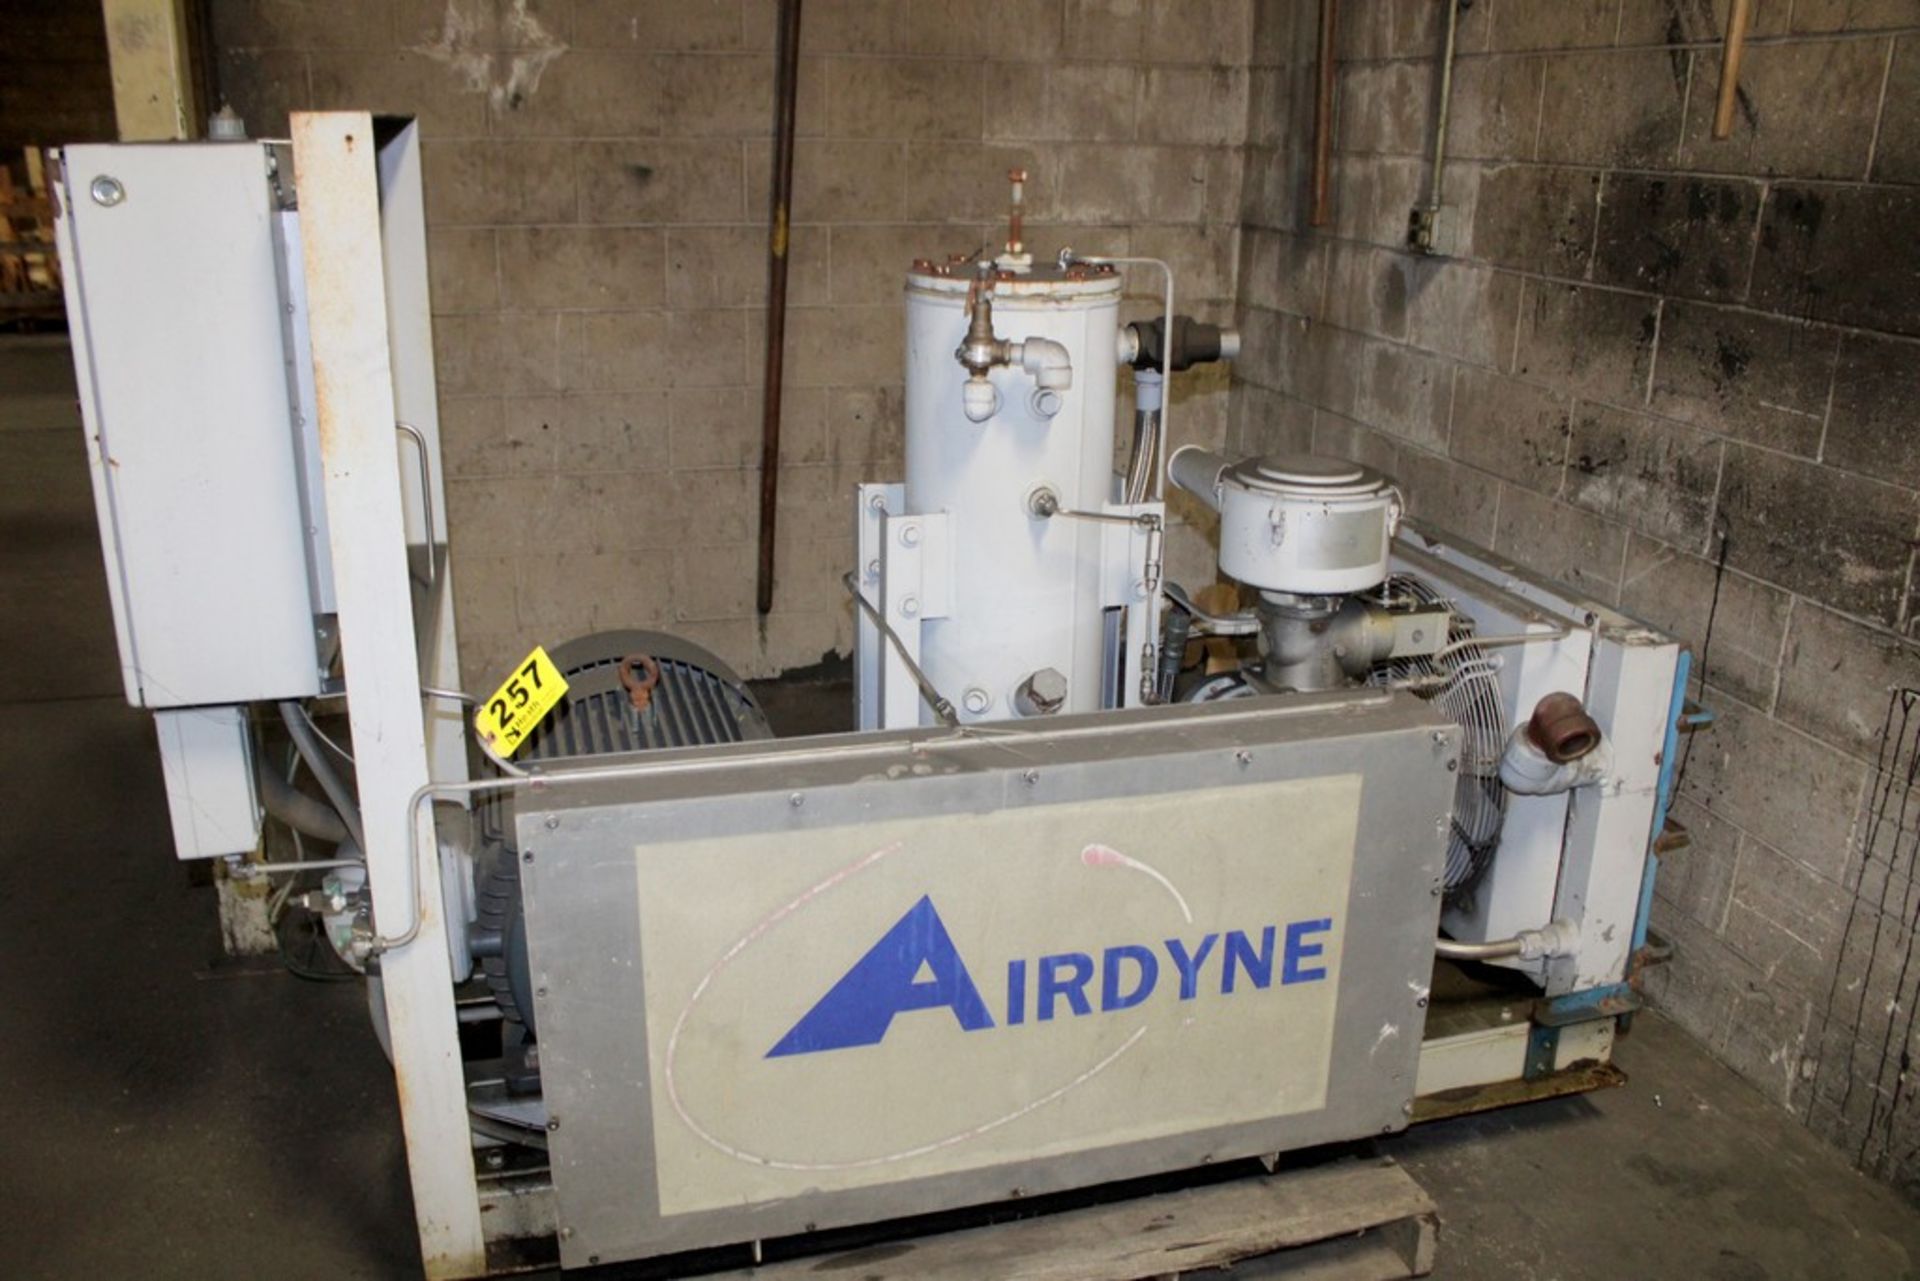 Airdyne Model 860XHP Base Mounted Rotary Screw Air Compressor, 60 Hp - Out of Service, Serial